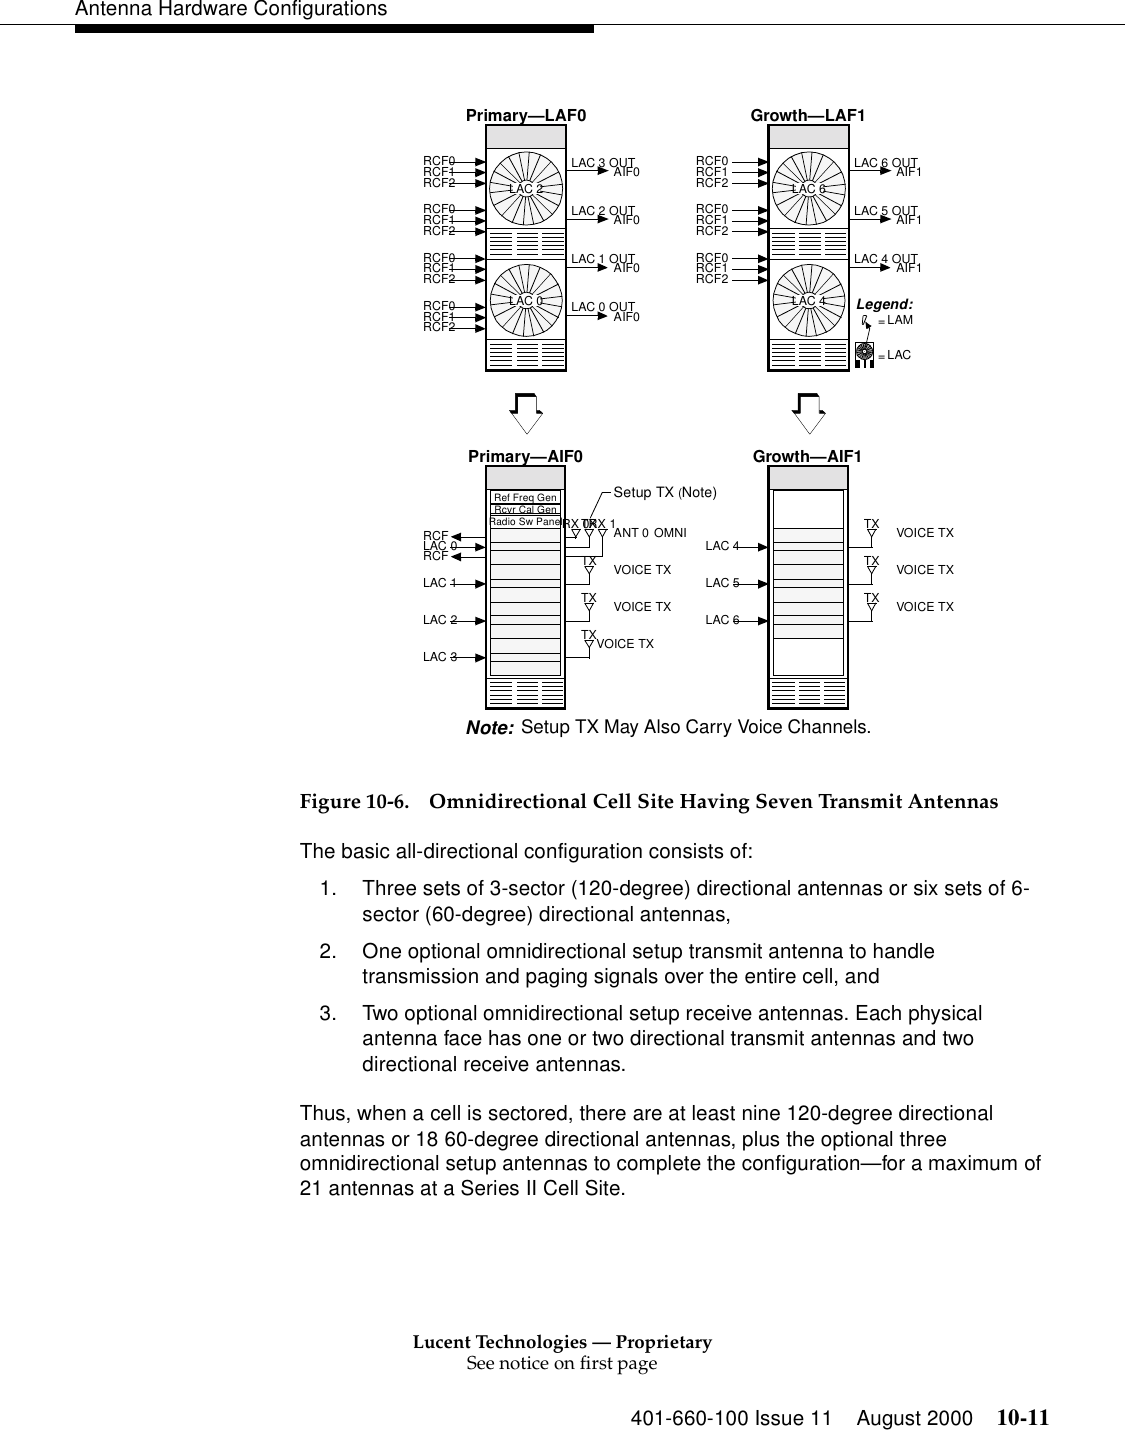 Lucent Technologies — ProprietarySee notice on first page401-660-100 Issue 11 August 2000 10-11Antenna Hardware Configurations Figure 10-6. Omnidirectional Cell Site Having Seven Transmit AntennasThe basic all-directional configuration consists of:1. Three sets of 3-sector (120-degree) directional antennas or six sets of 6-sector (60-degree) directional antennas,2. One optional omnidirectional setup transmit antenna to handle transmission and paging signals over the entire cell, and 3. Two optional omnidirectional setup receive antennas. Each physical antenna face has one or two directional transmit antennas and two directional receive antennas. Thus, when a cell is sectored, there are at least nine 120-degree directional antennas or 18 60-degree directional antennas, plus the optional three omnidirectional setup antennas to complete the configuration—for a maximum of 21 antennas at a Series II Cell Site.Growth—AIF1LAC 6LAC 5LAC 4TXTXTXVOICE TXVOICE TXVOICE TXRef Freq GenRcvr Cal GenLAC 3LAC 2LAC 1RCFLAC 0RCFPrimary—AIF0TXTXTXRX 0RX 1TX ANT 0VOICE TXVOICE TXVOICE TXRadio Sw Panel OMNILAC=RCF2RCF1RCF0AIF0RCF2RCF1RCF0RCF2RCF1RCF0RCF2RCF1RCF0AIF0AIF0AIF0Primary—LAF0AIF1RCF2RCF1RCF0RCF2RCF1RCF0RCF2RCF1RCF0AIF1AIF1Growth—LAF1LAC 3 OUTLAC 1 OUTLAC 2 OUTLAC 0 OUTLAC 4 OUTLAC 5 OUTLAC 6 OUTLAM=Legend:LAC 0LAC 2LAC 4LAC 6Setup TX (Note)Setup TX May Also Carry Voice Channels.Note: